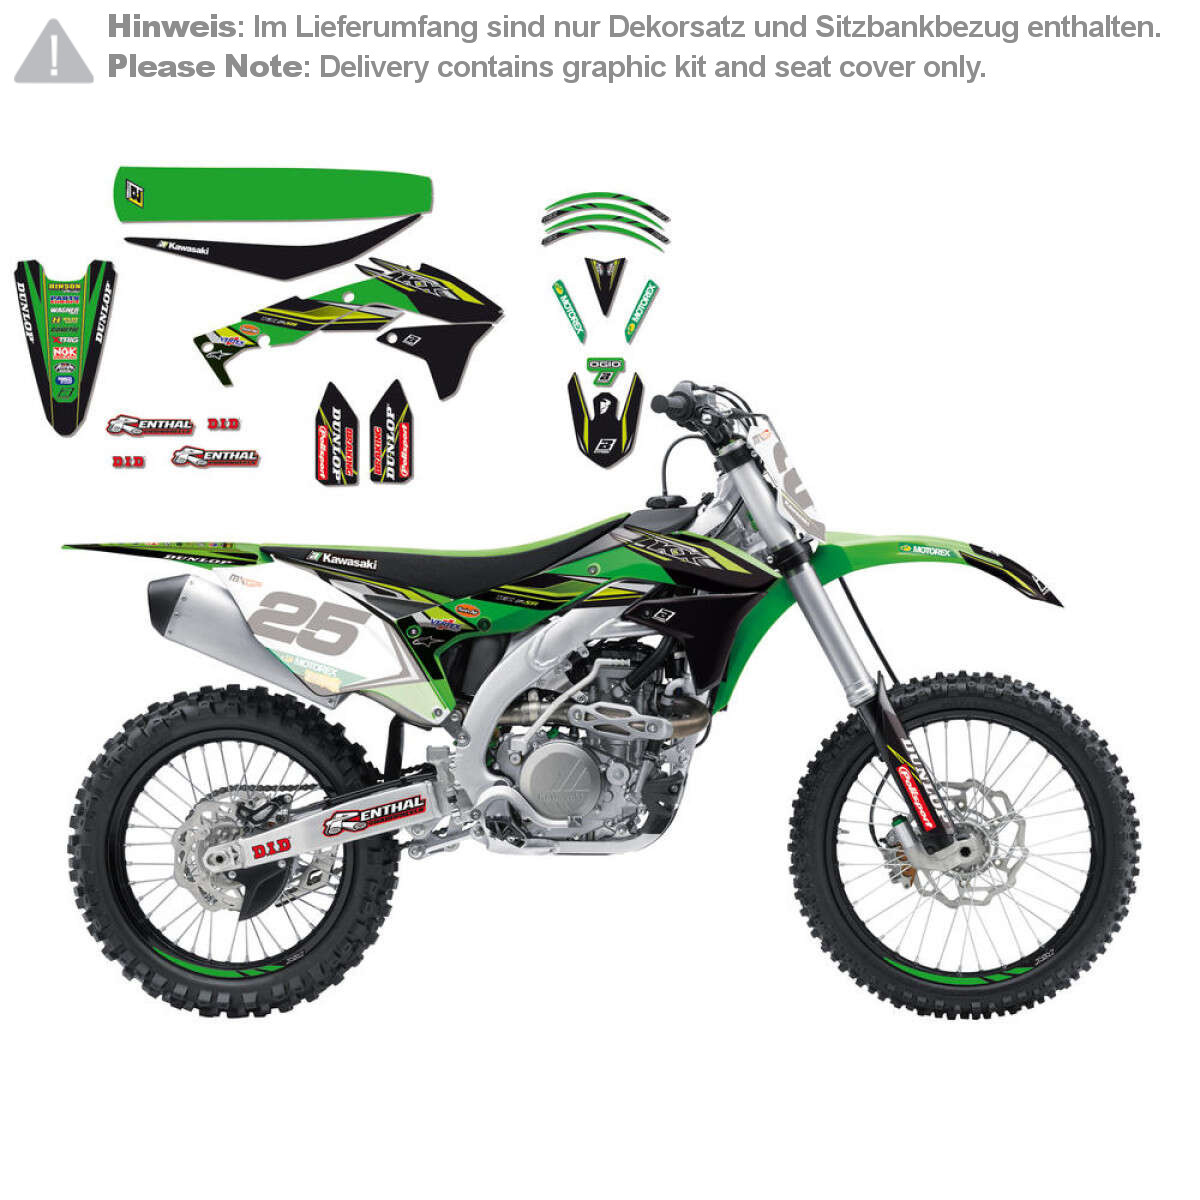 Blackbird Racing Graphic Kit with Seat Cover Replica Team Kawasaki KX-F 450 16-17, Team Kawasaki Racing '17, Green/Black